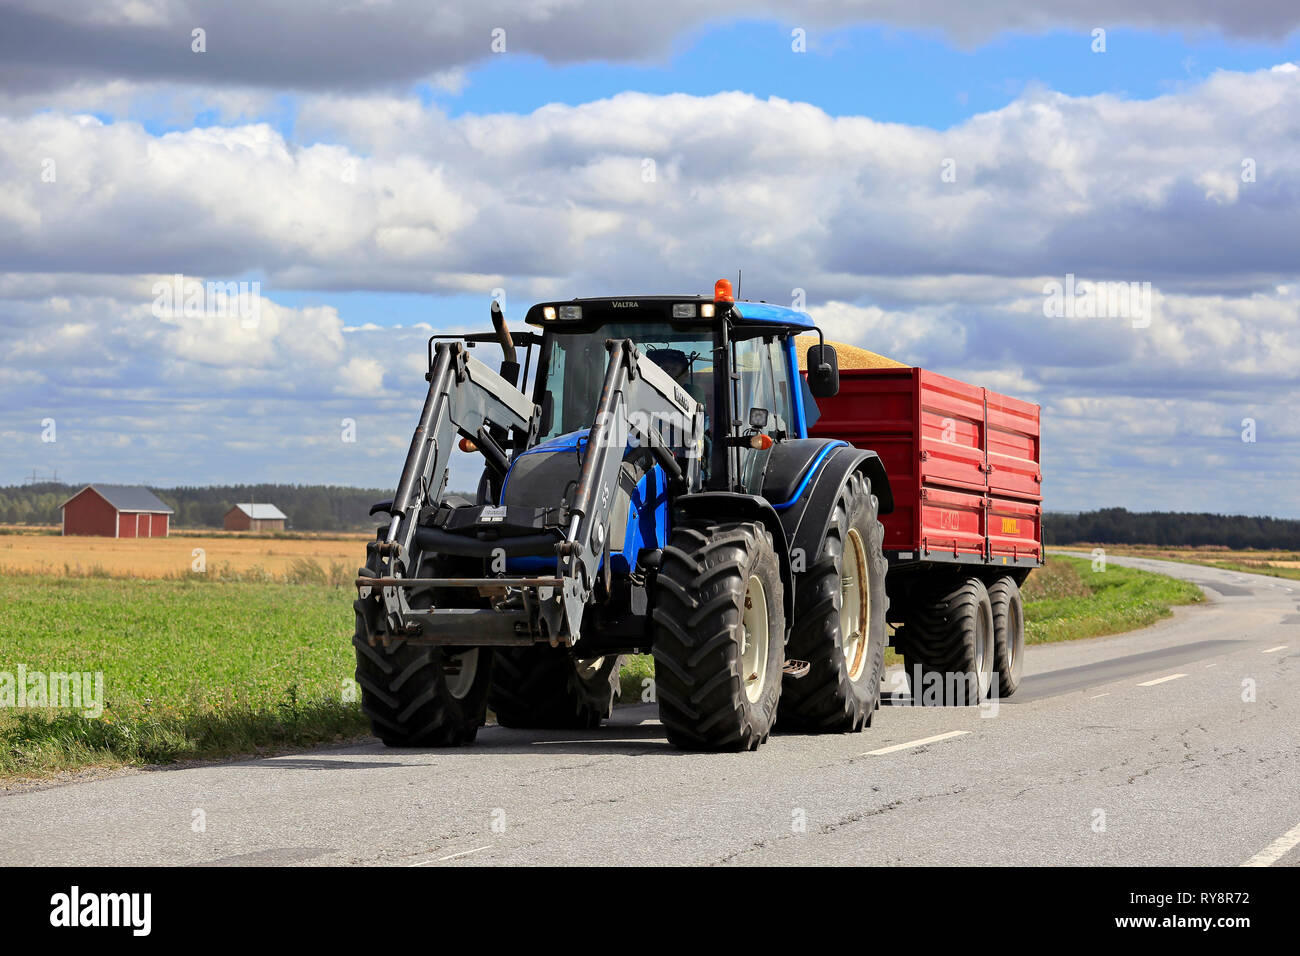 Ilmajoki, Finland - August 11, 2018: Blue Valtra farm tractor pulls trailer load of harvested grain along rural road on a clear day of autumn harvest. Stock Photo